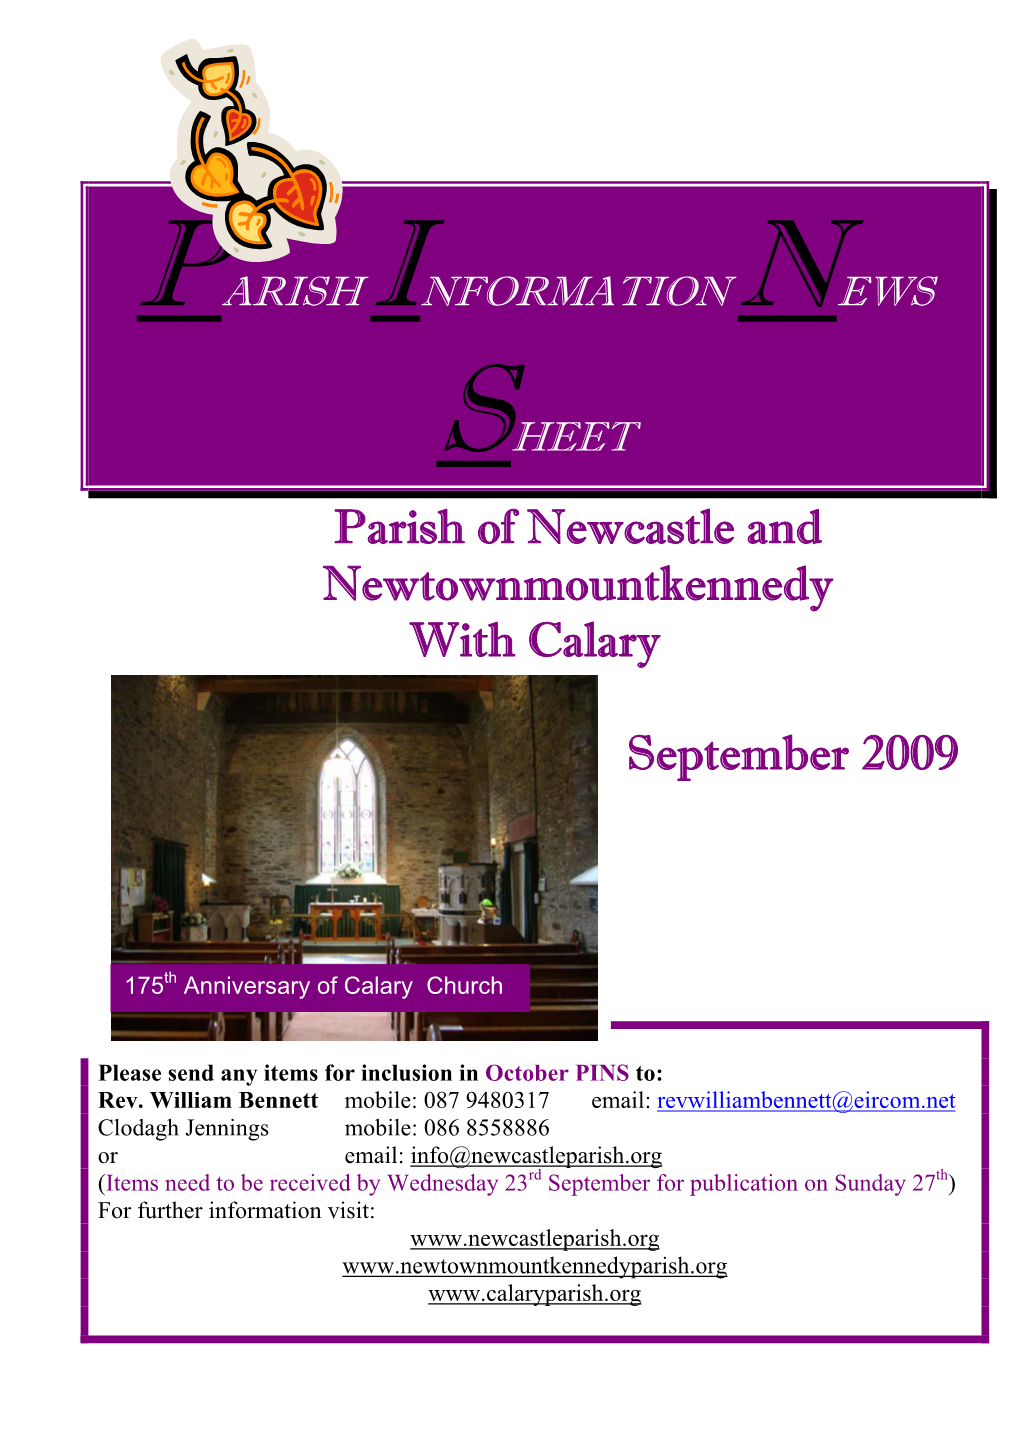 Parish of Newcastle and Newtownmountkennedy with Calary